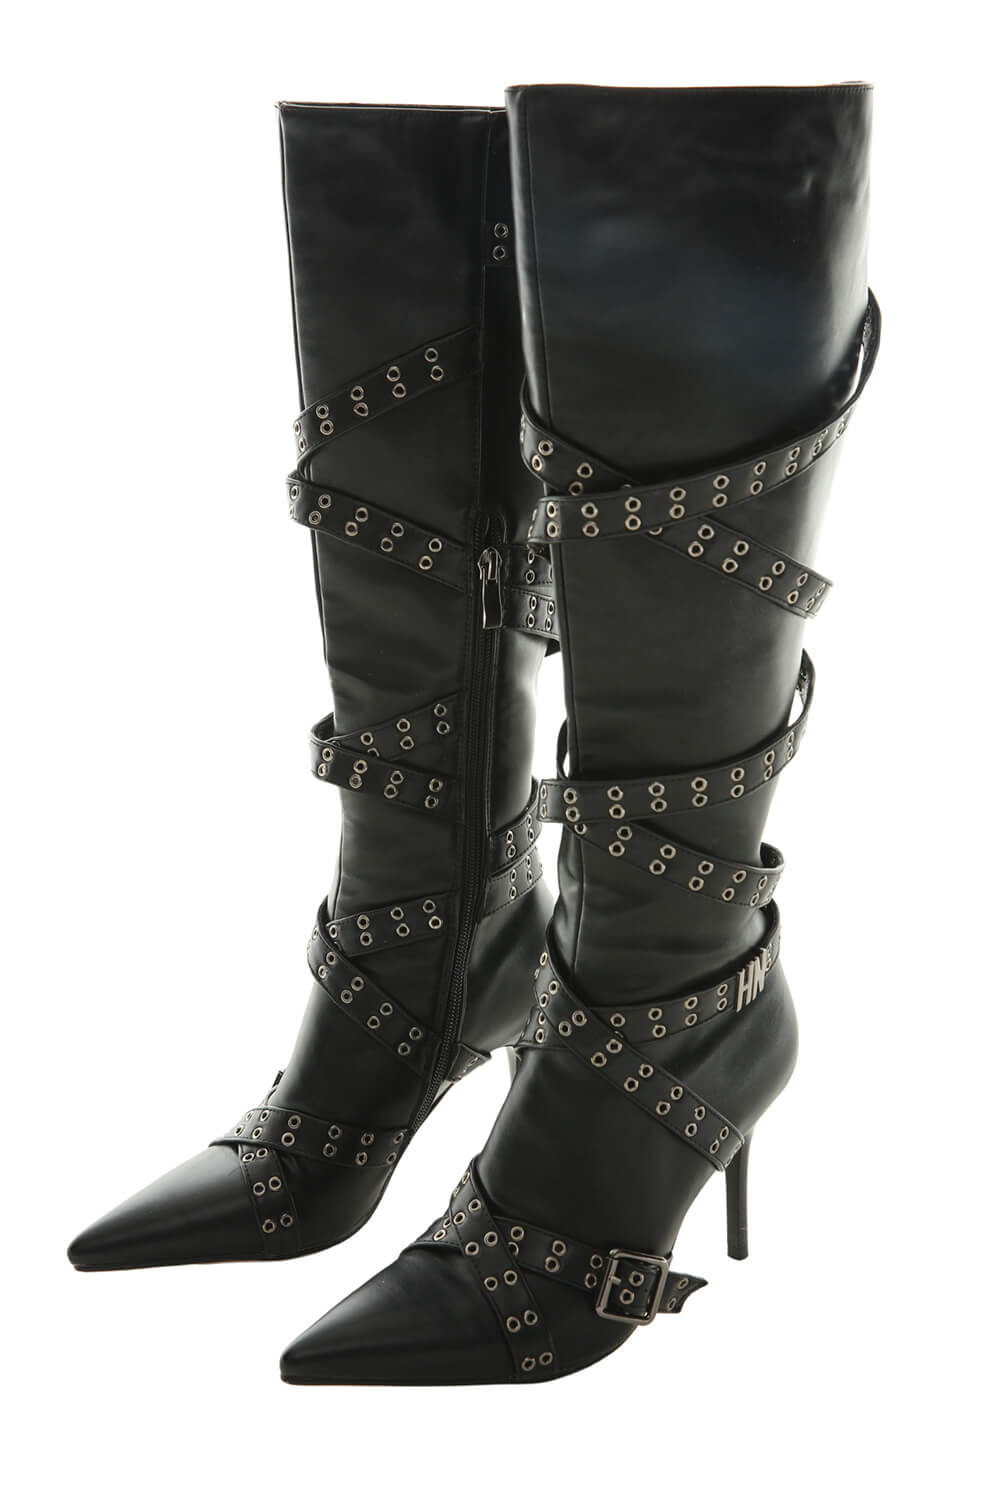 Strap Belt Pointed Toe Knee High Stiletto Boots With Buckle Details - Black